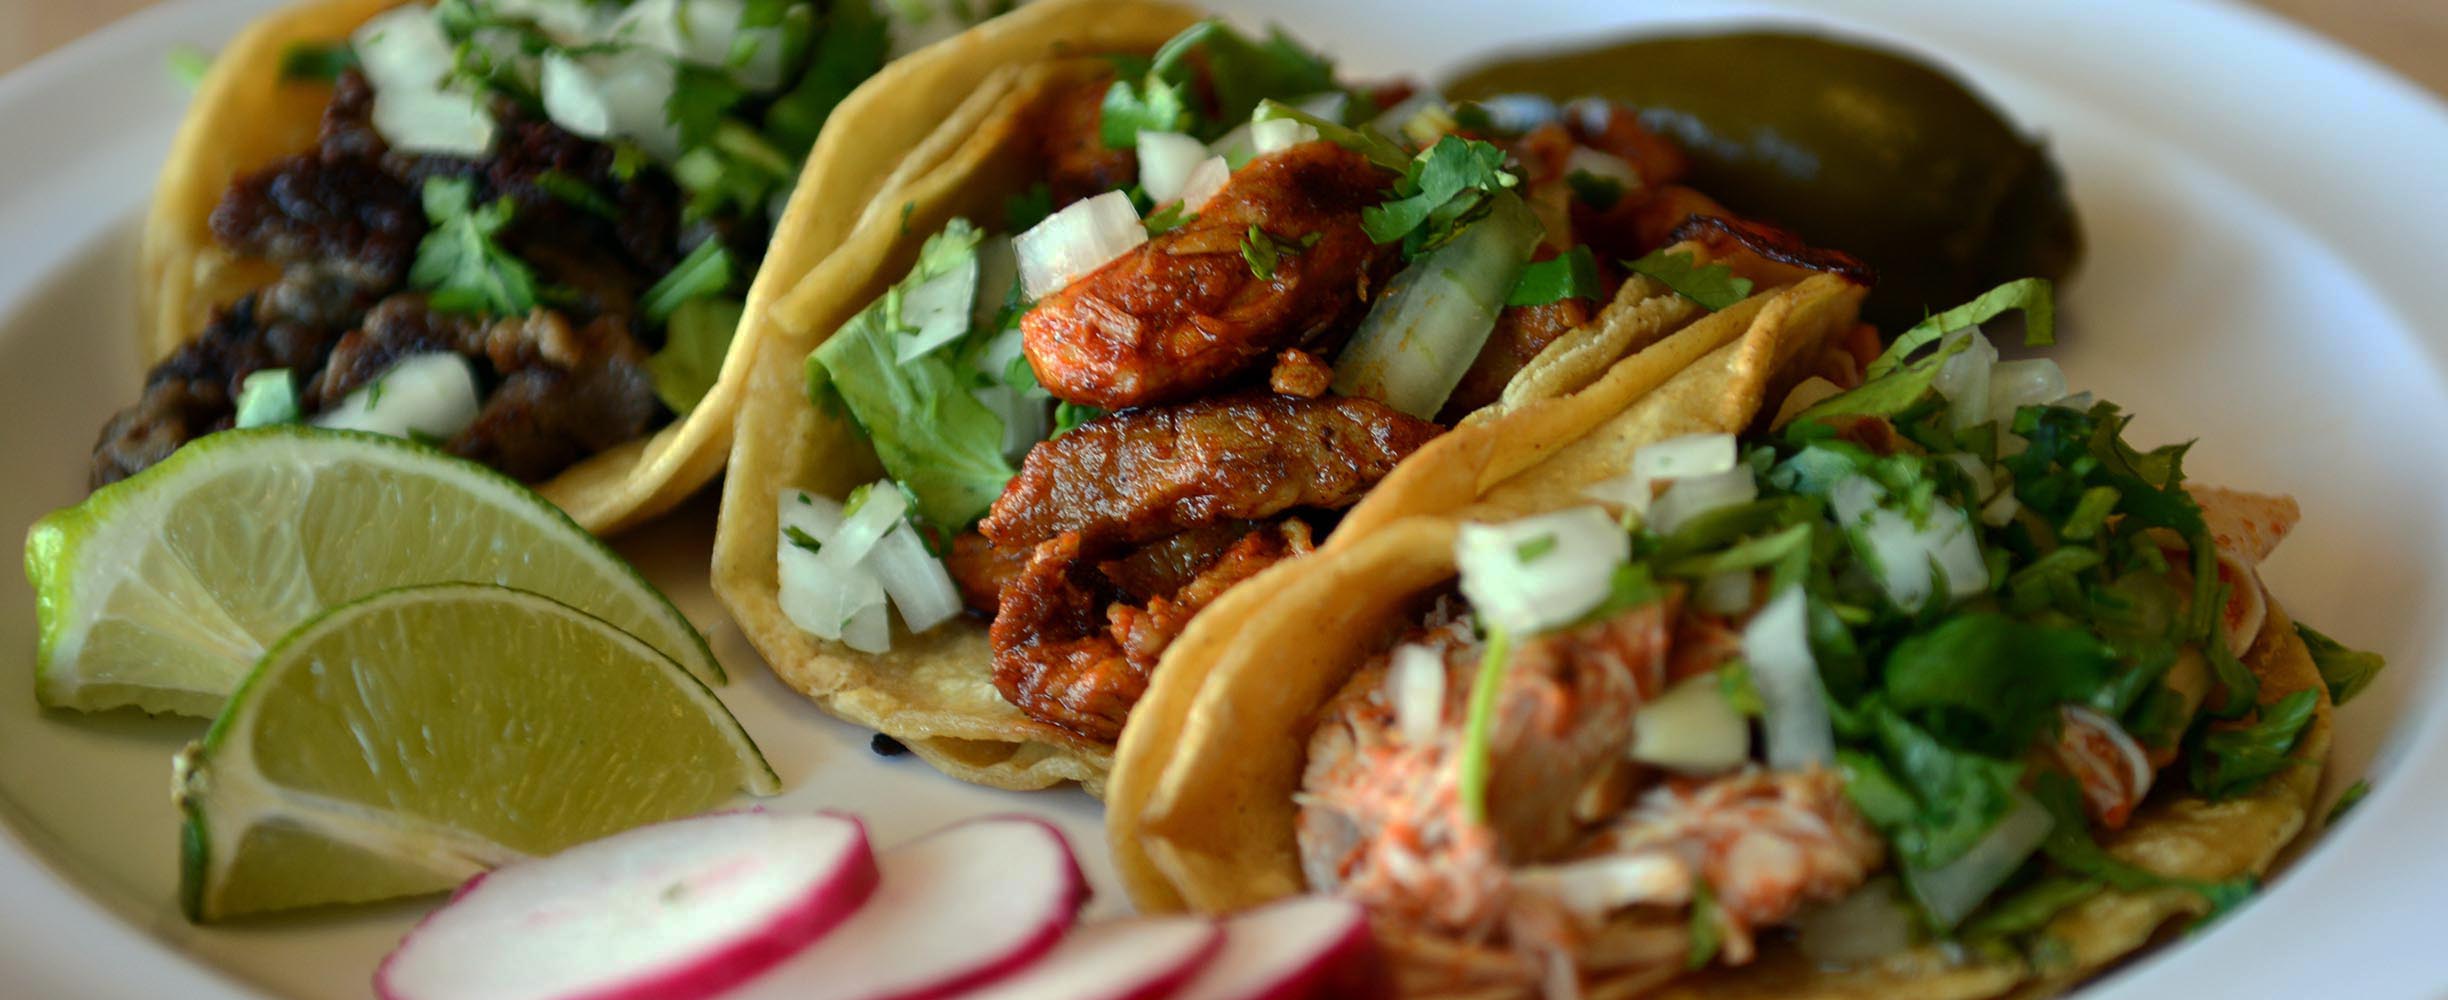 Our Tacos and Taquitos are true Mexican style, prepared by cooks from Mexico and Salvador.